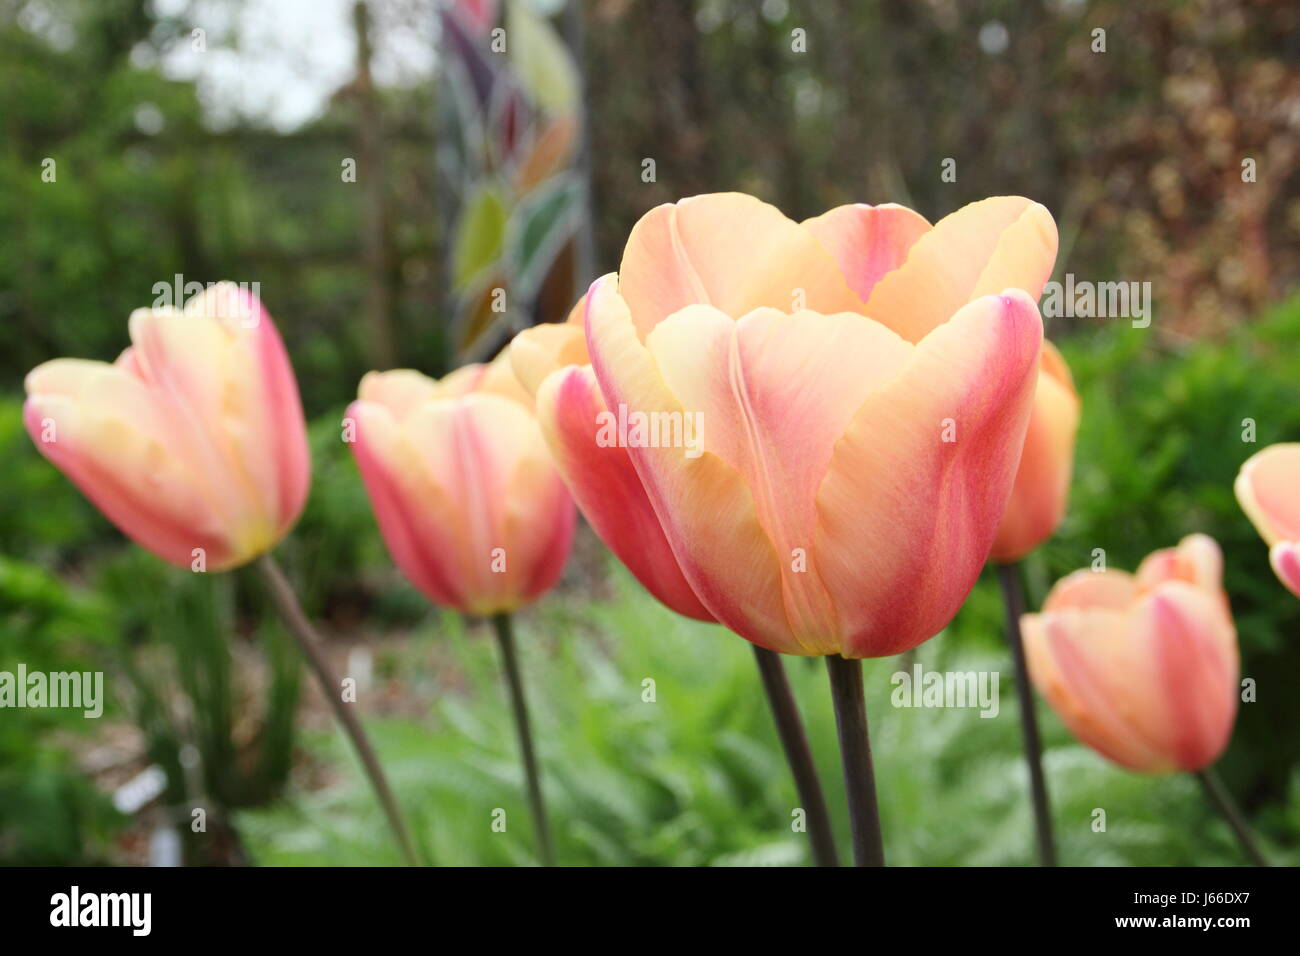 Tulipa 'Apricot Foxx' in full bloom in the border of an English garden - late April Stock Photo